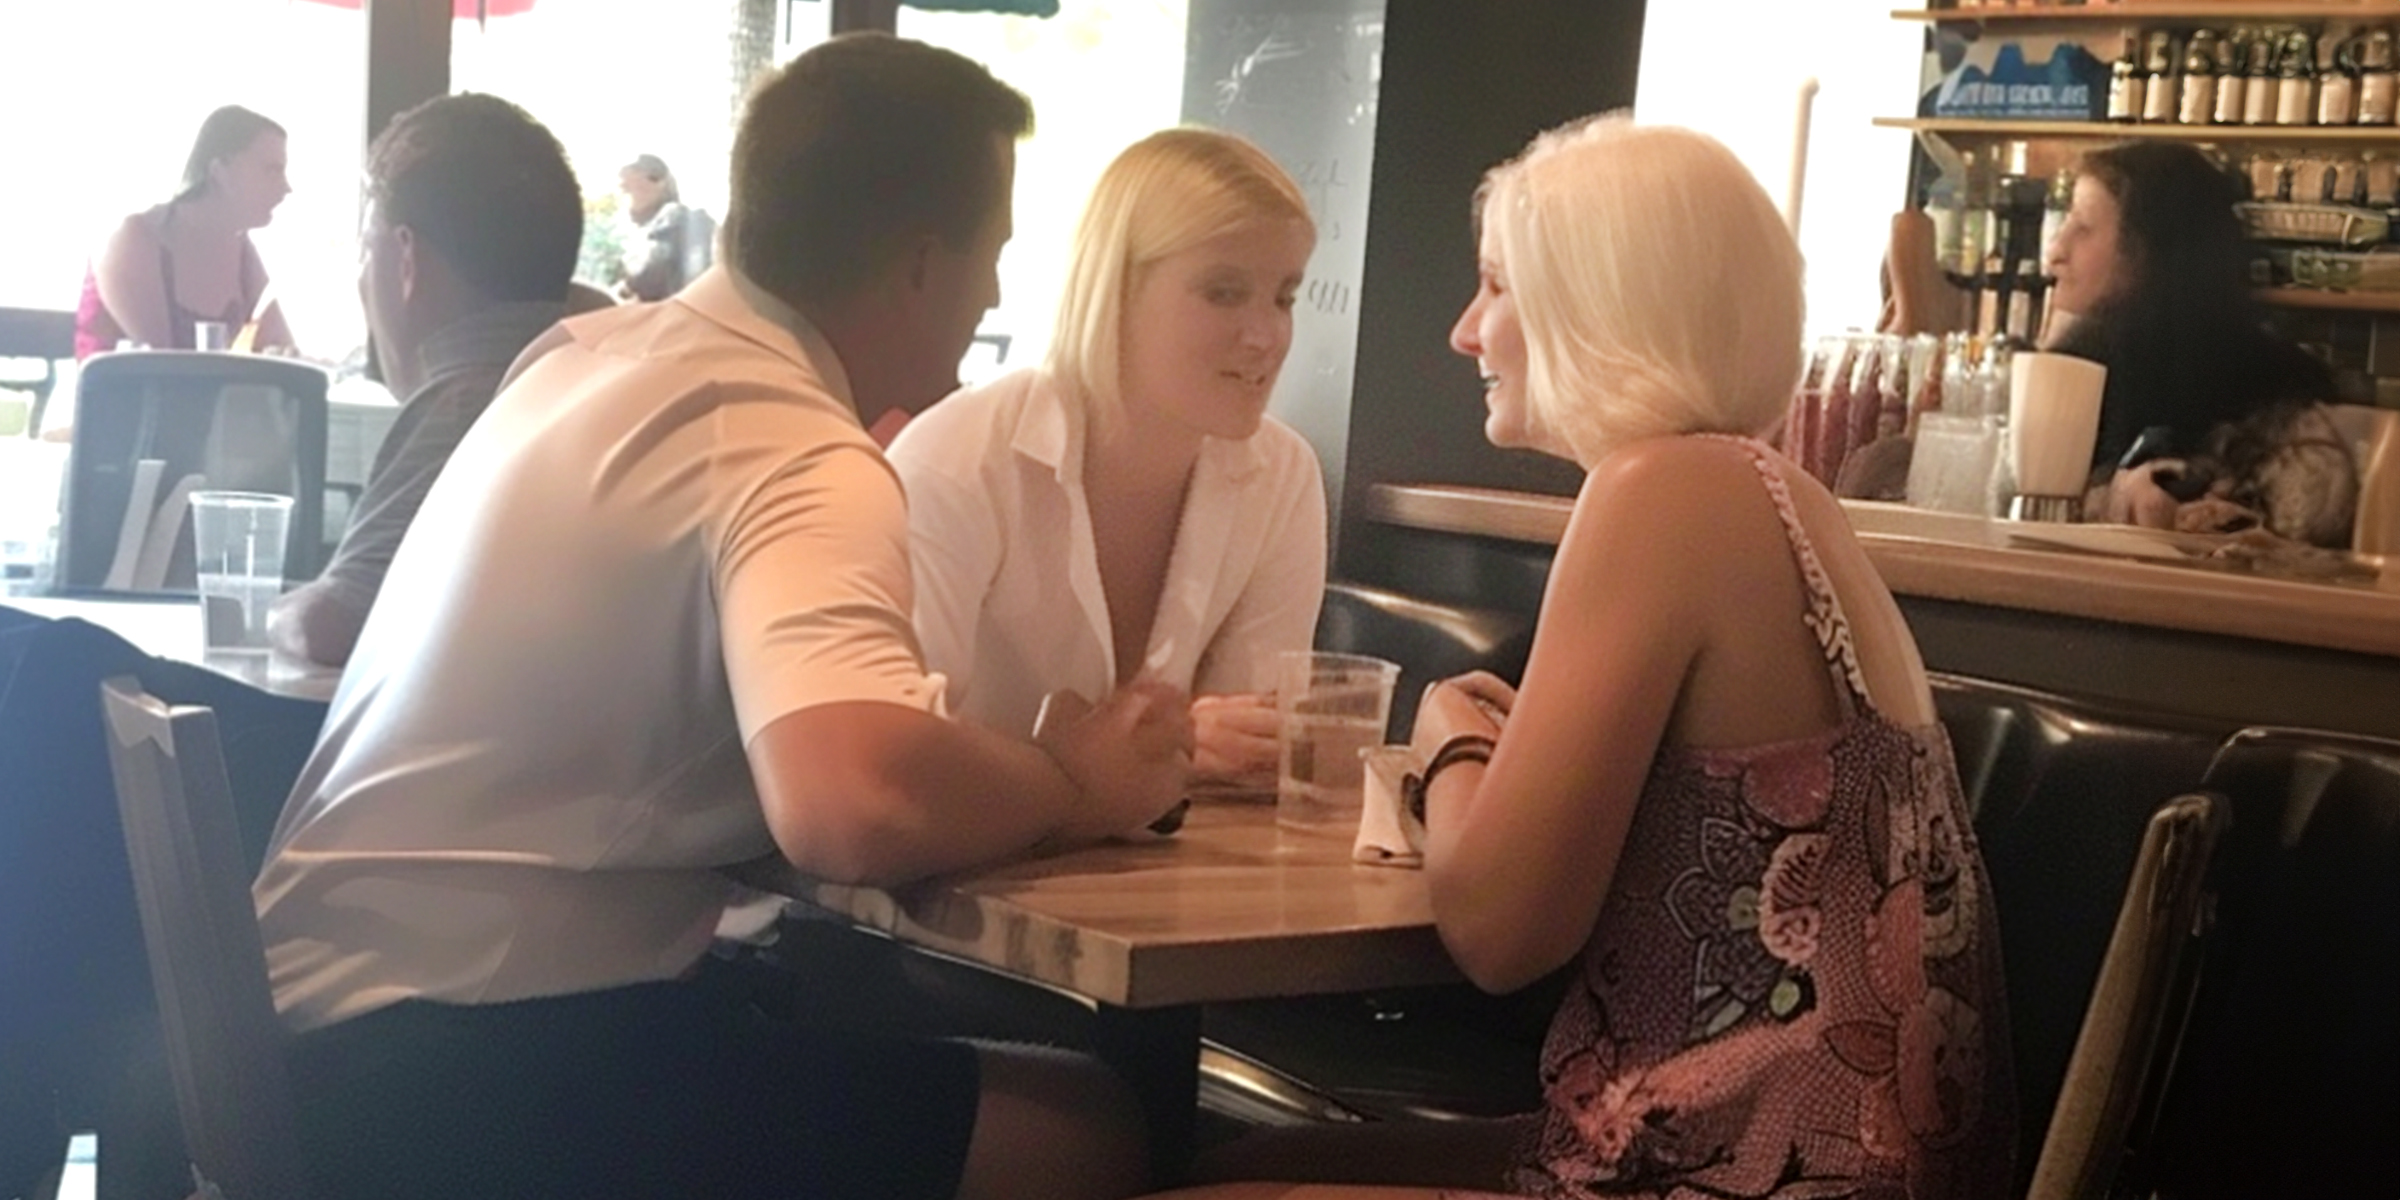 Two women and a man seated in a restaurant | Source: Amomama